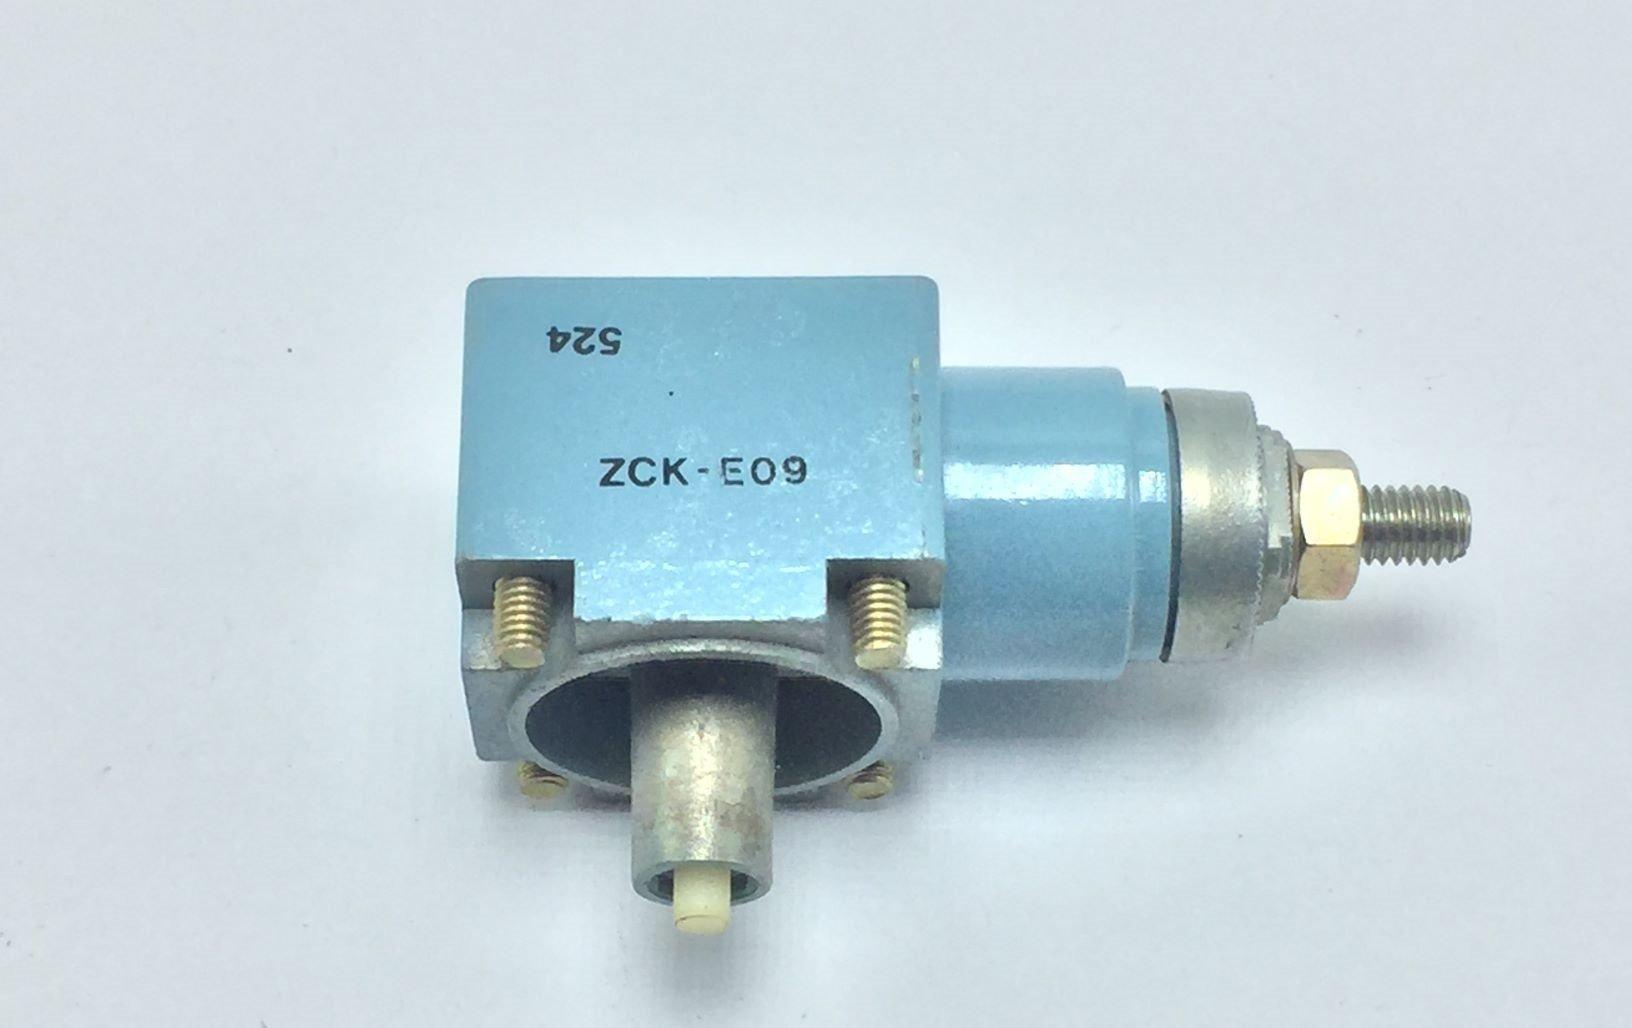   ZCK-E09 LIMIT SWITCH HEAD TESTED/EXCELLENT 